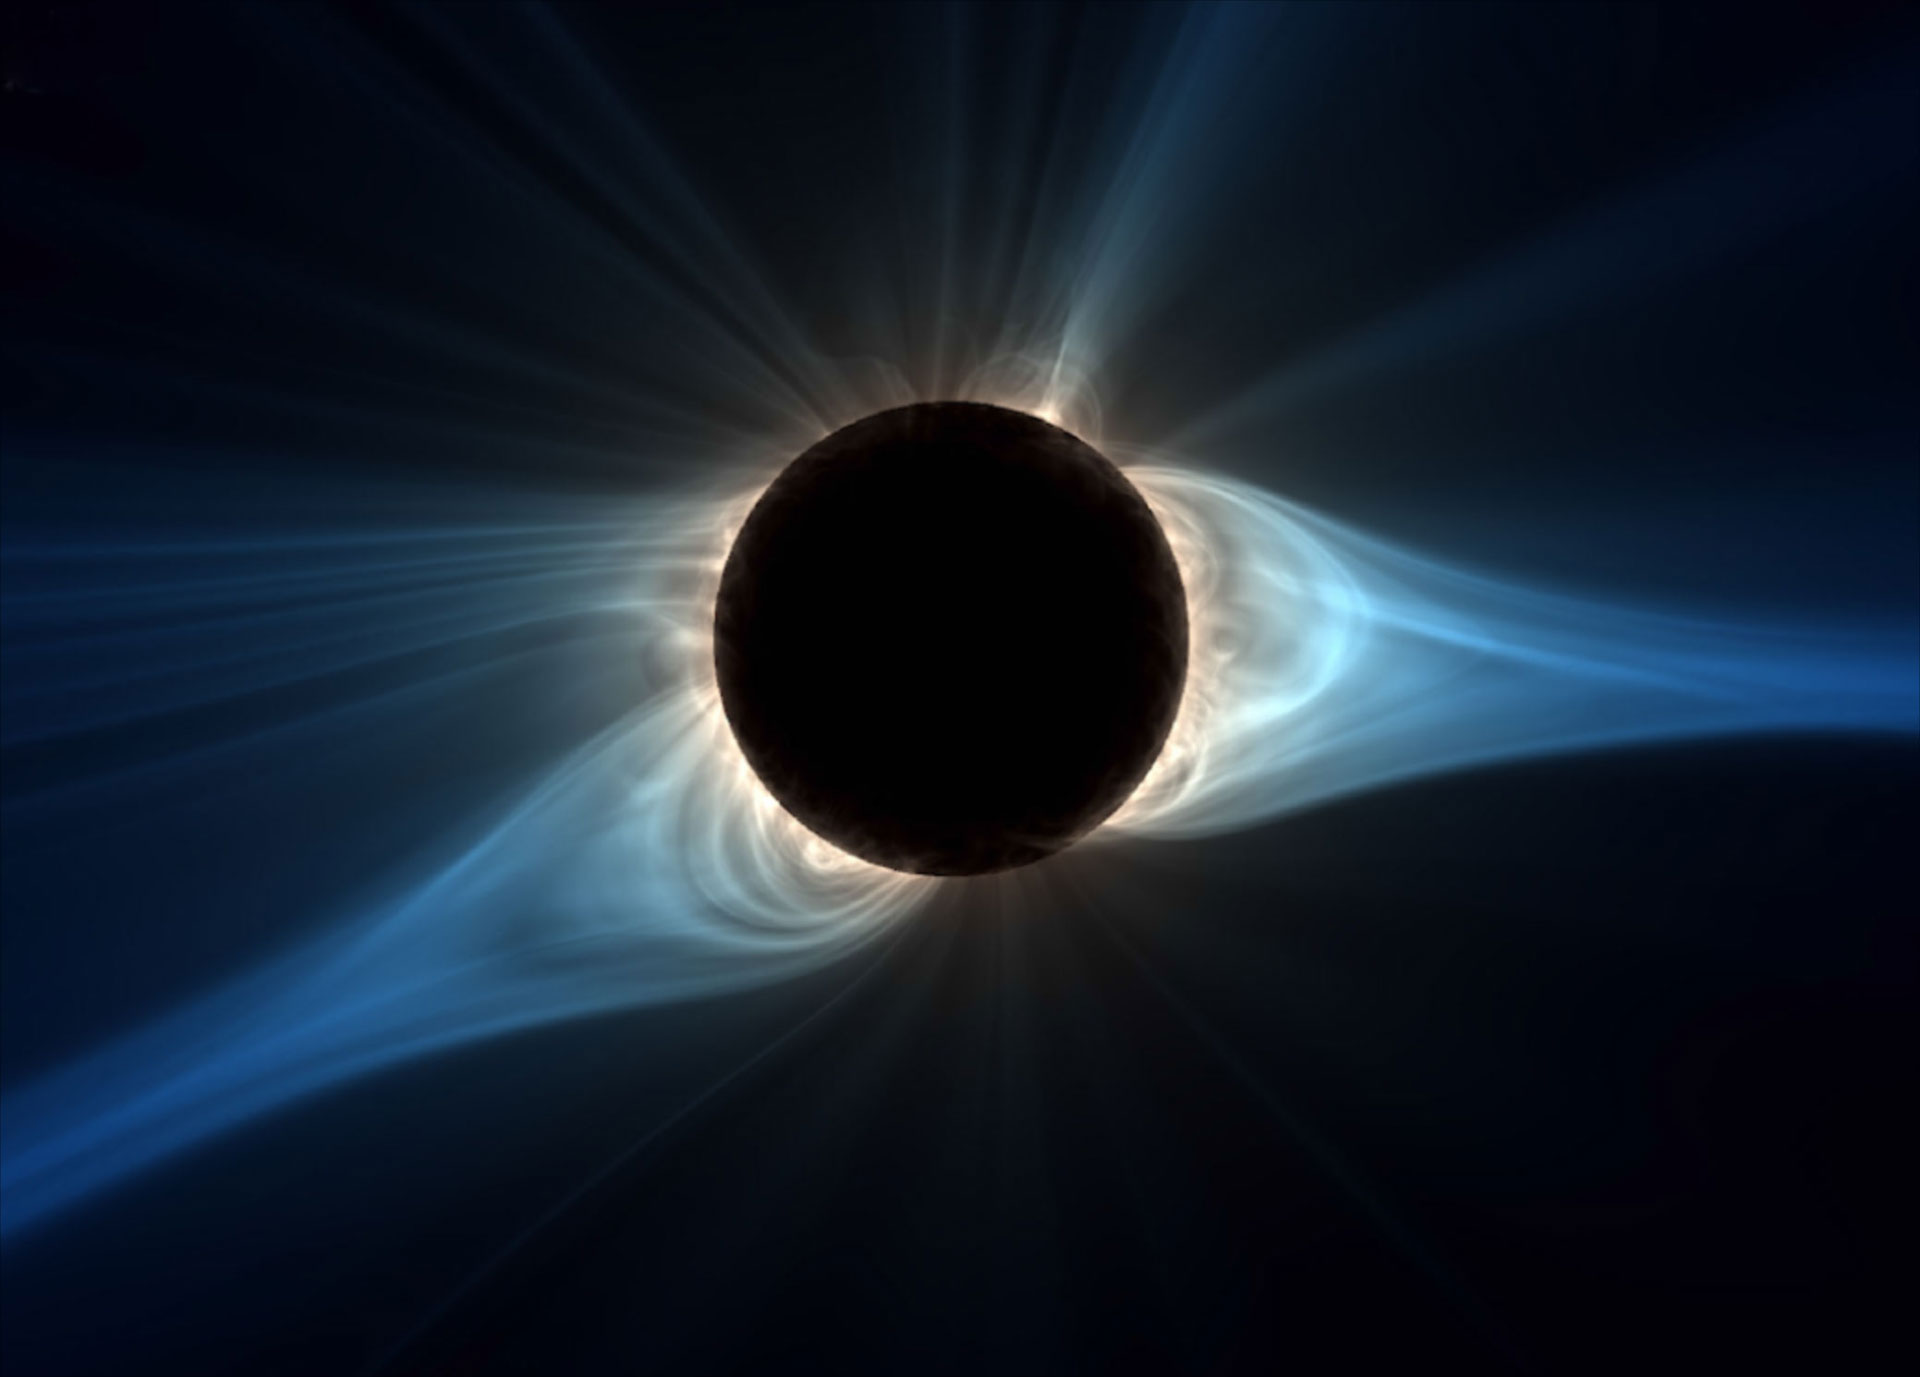 How Scientists Predicted the Corona for the August 2017 Total Solar Eclipse